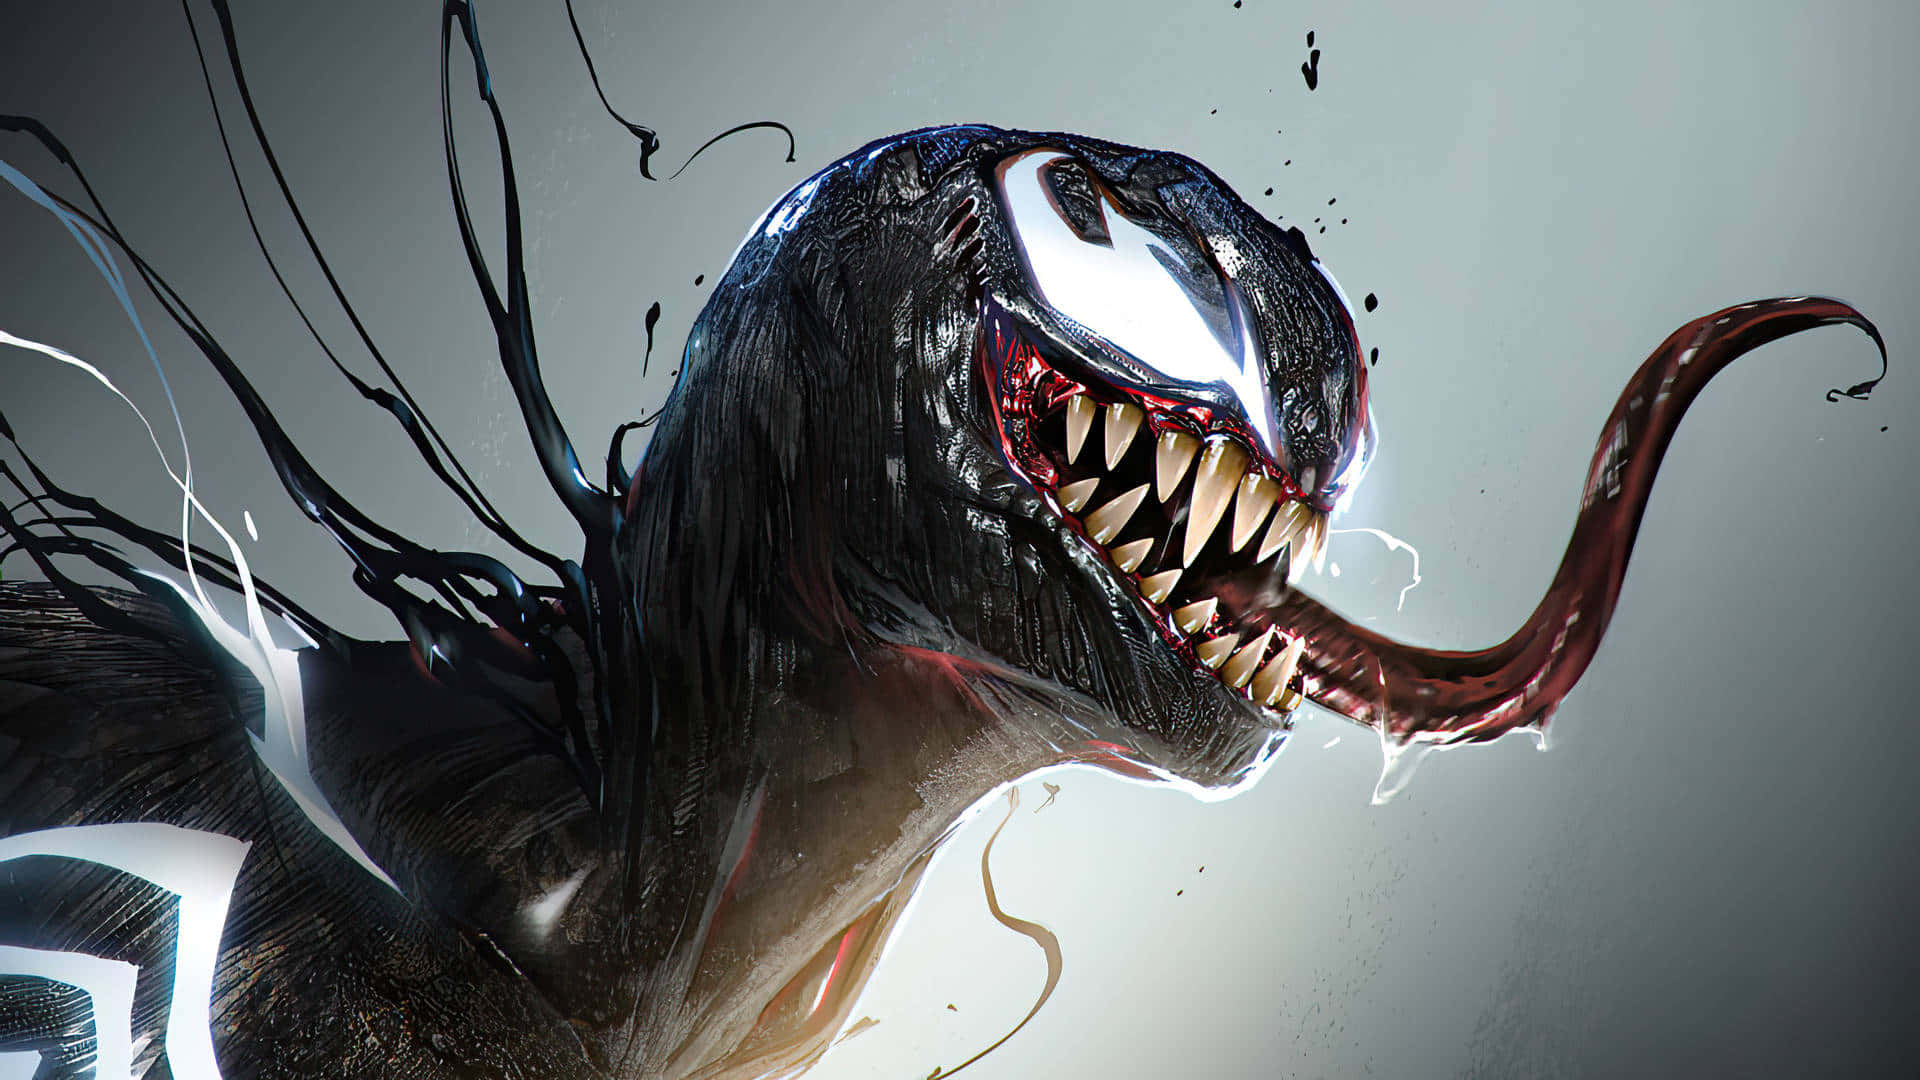 venom is shown with his mouth open